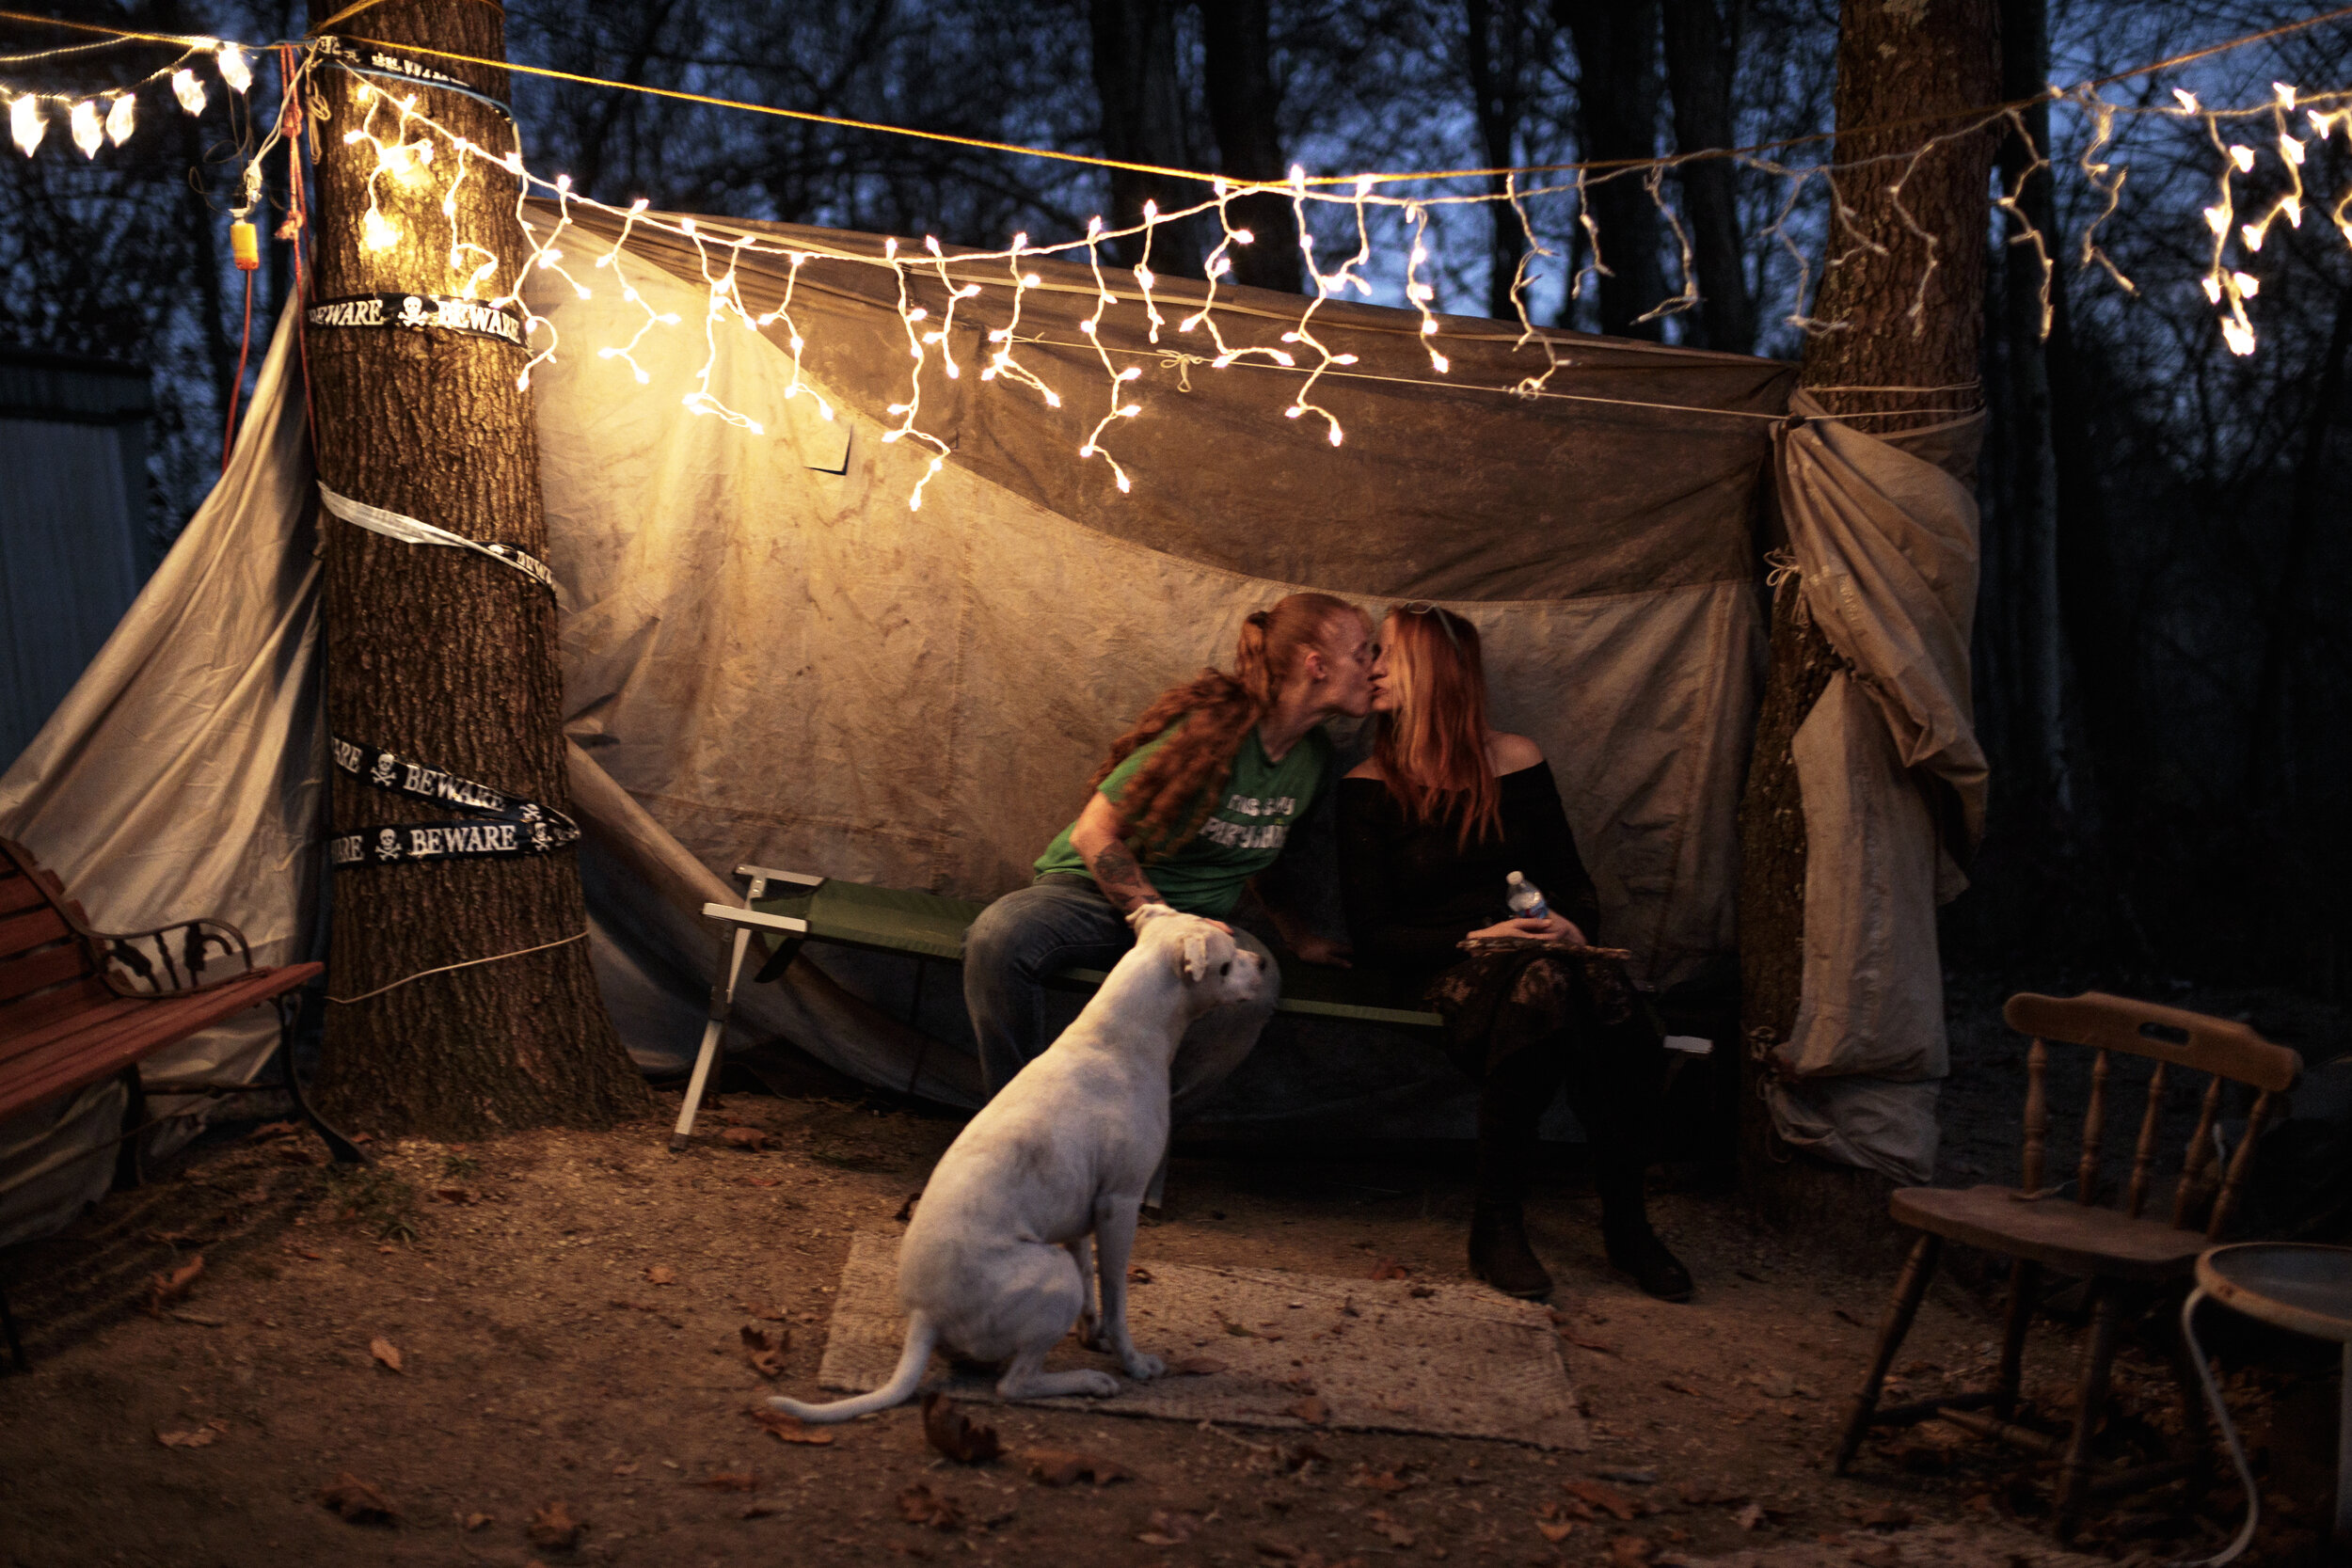  Leslie and Staci kiss in a makeshift lounge outside their trailer. “I just feel her. I feel her when she touches me. When she kisses me, I just feel something,” says Leslie. The reason [for marriage] for me is to make our family whole and complete,”